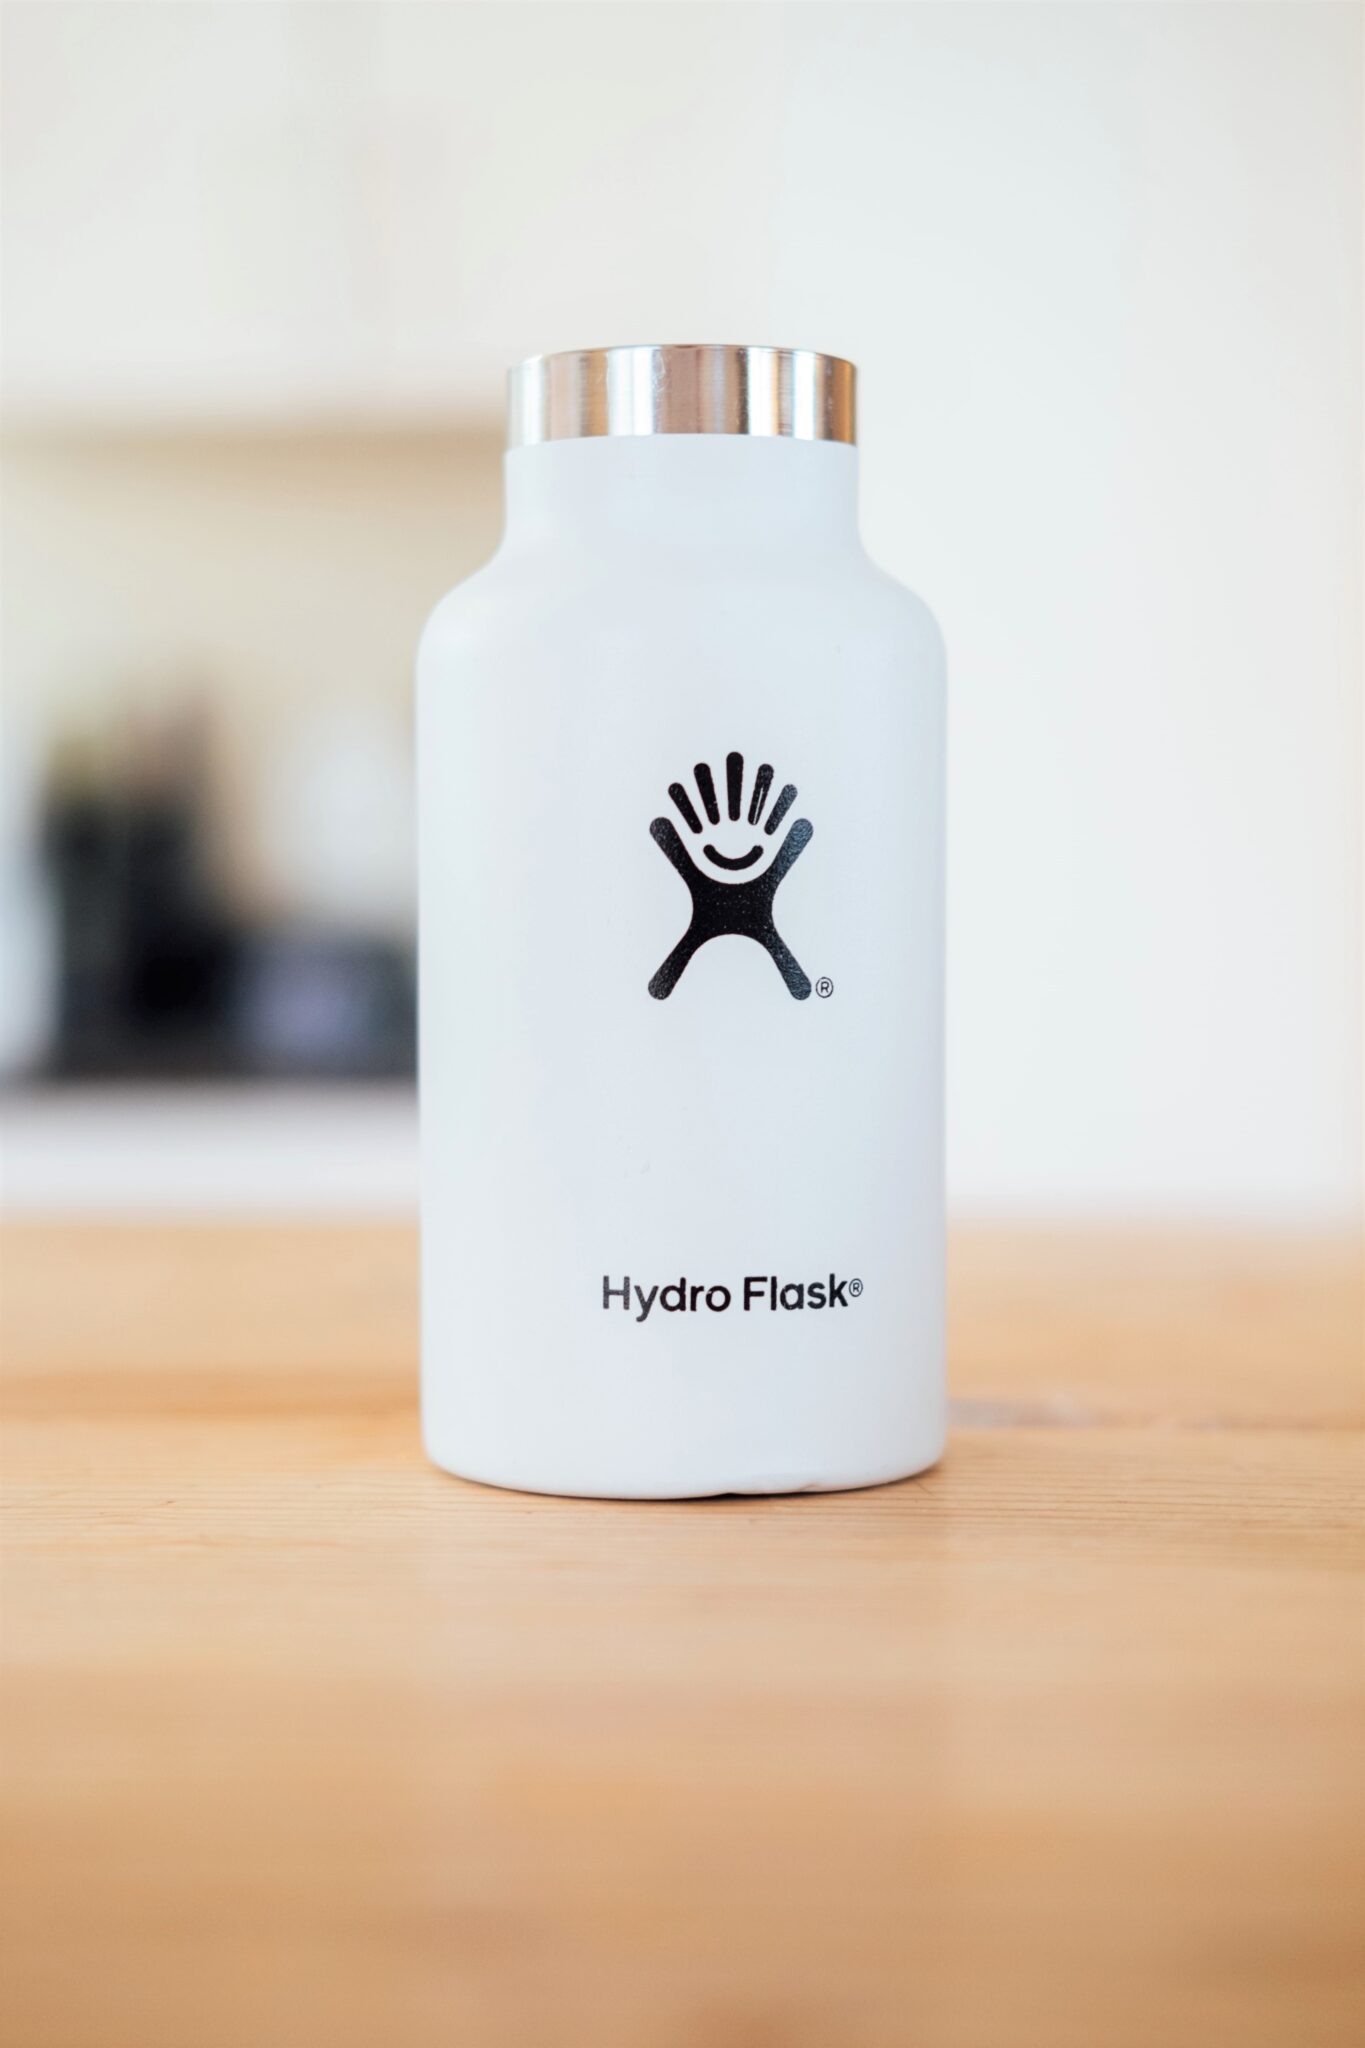 A white Hydroflask sits on a wooden table. This article covers essential back to school items to get your kids excited for the school year.